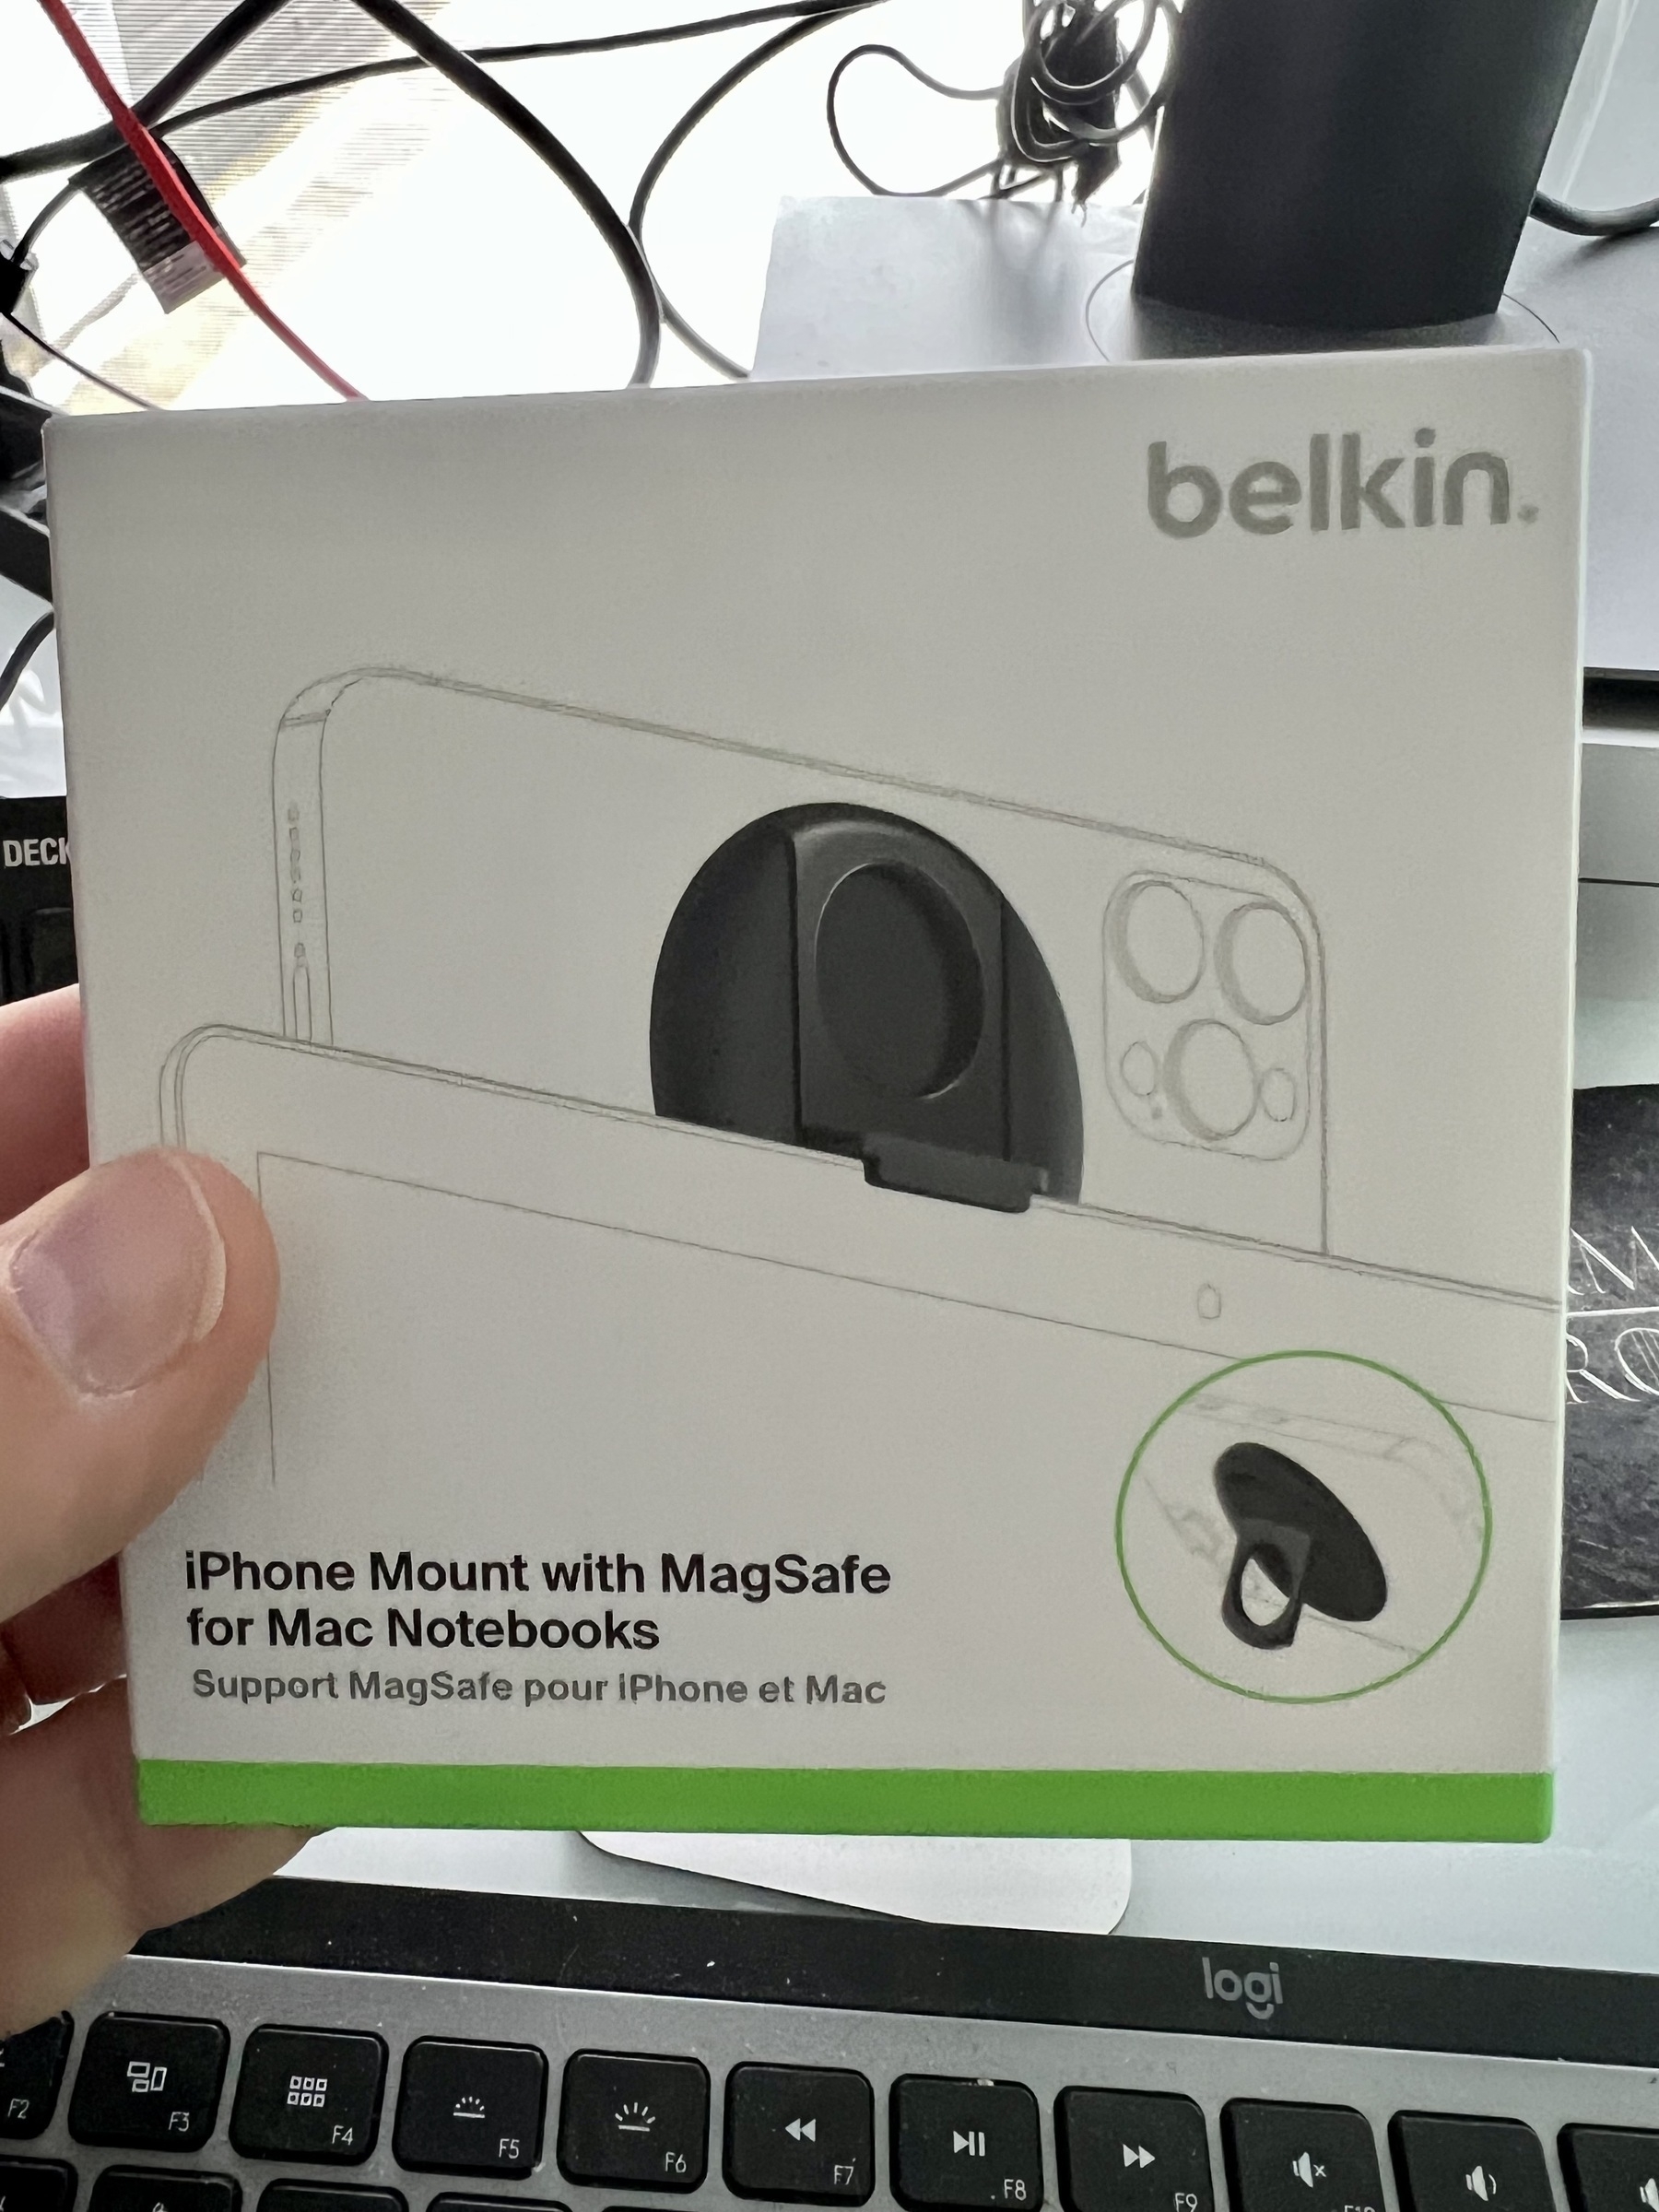 Belkin iPhone mount with MagSafe for Mac Notebooks box. 